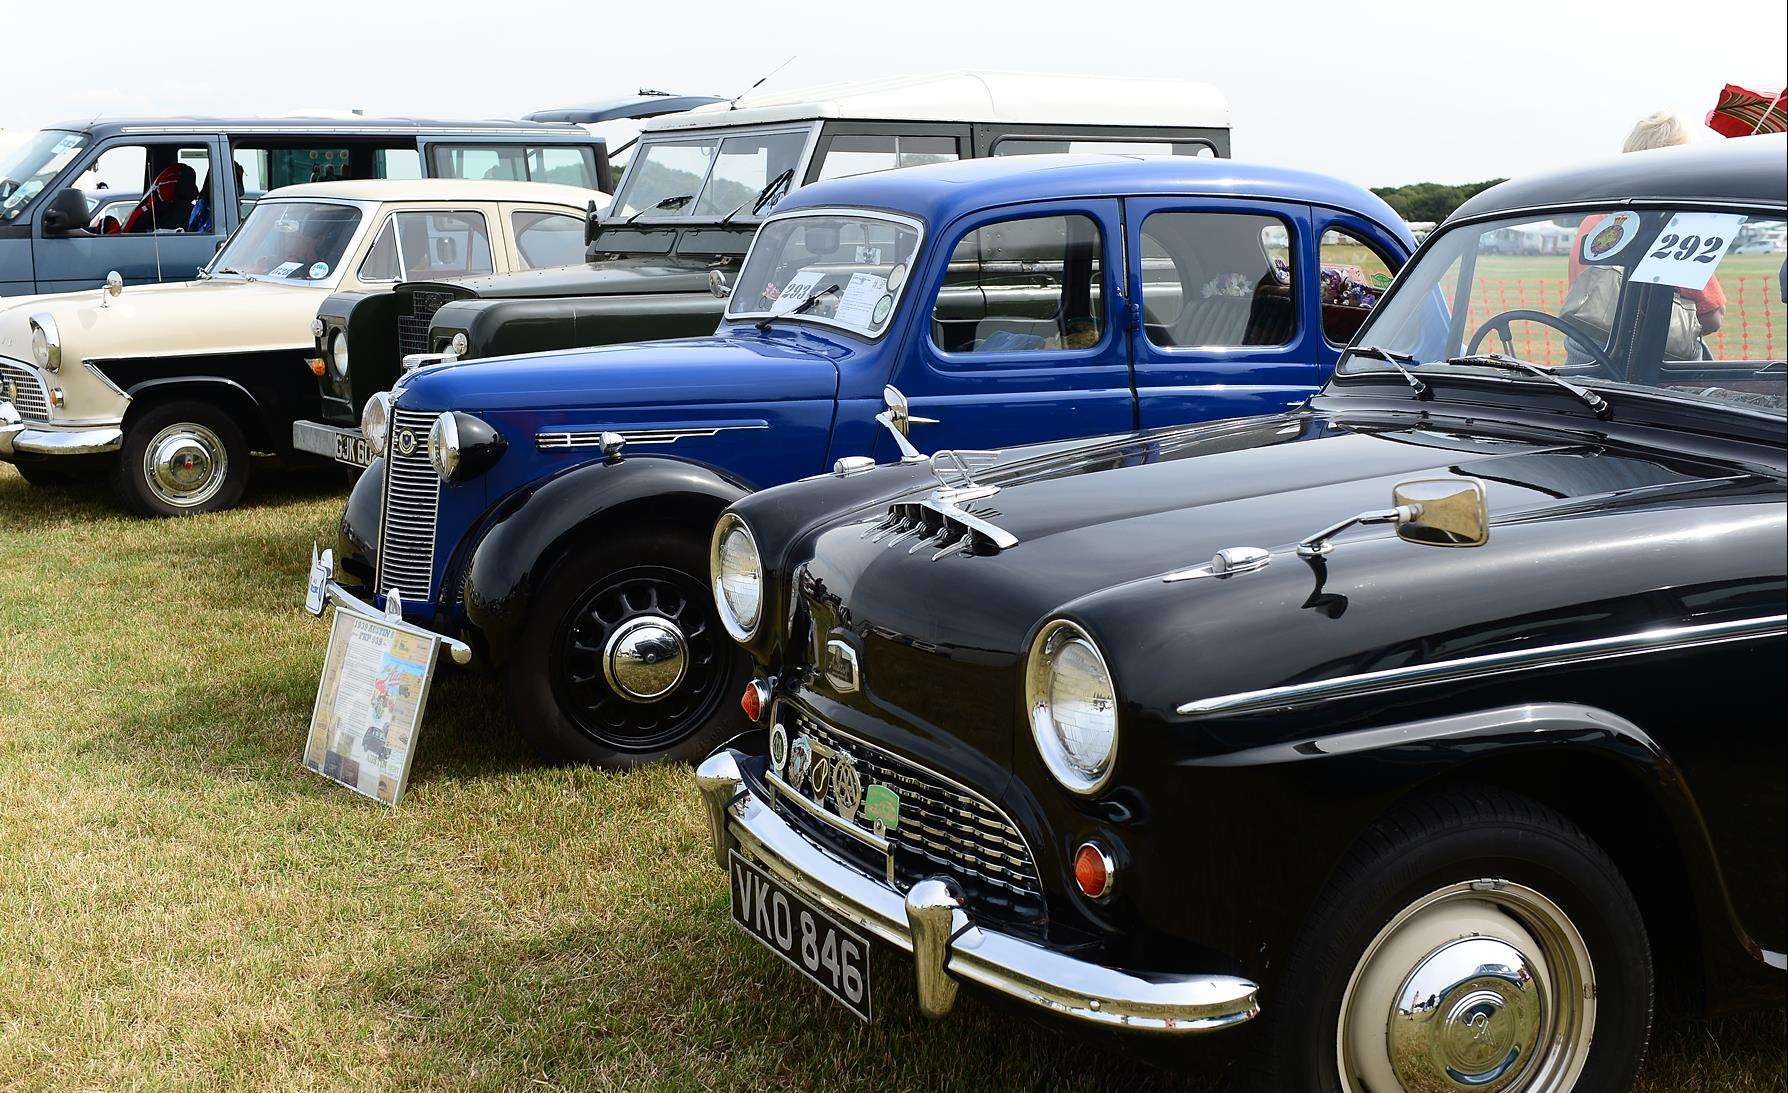 The Weald of Kent Steam Rally also has classic cars and other vehicles